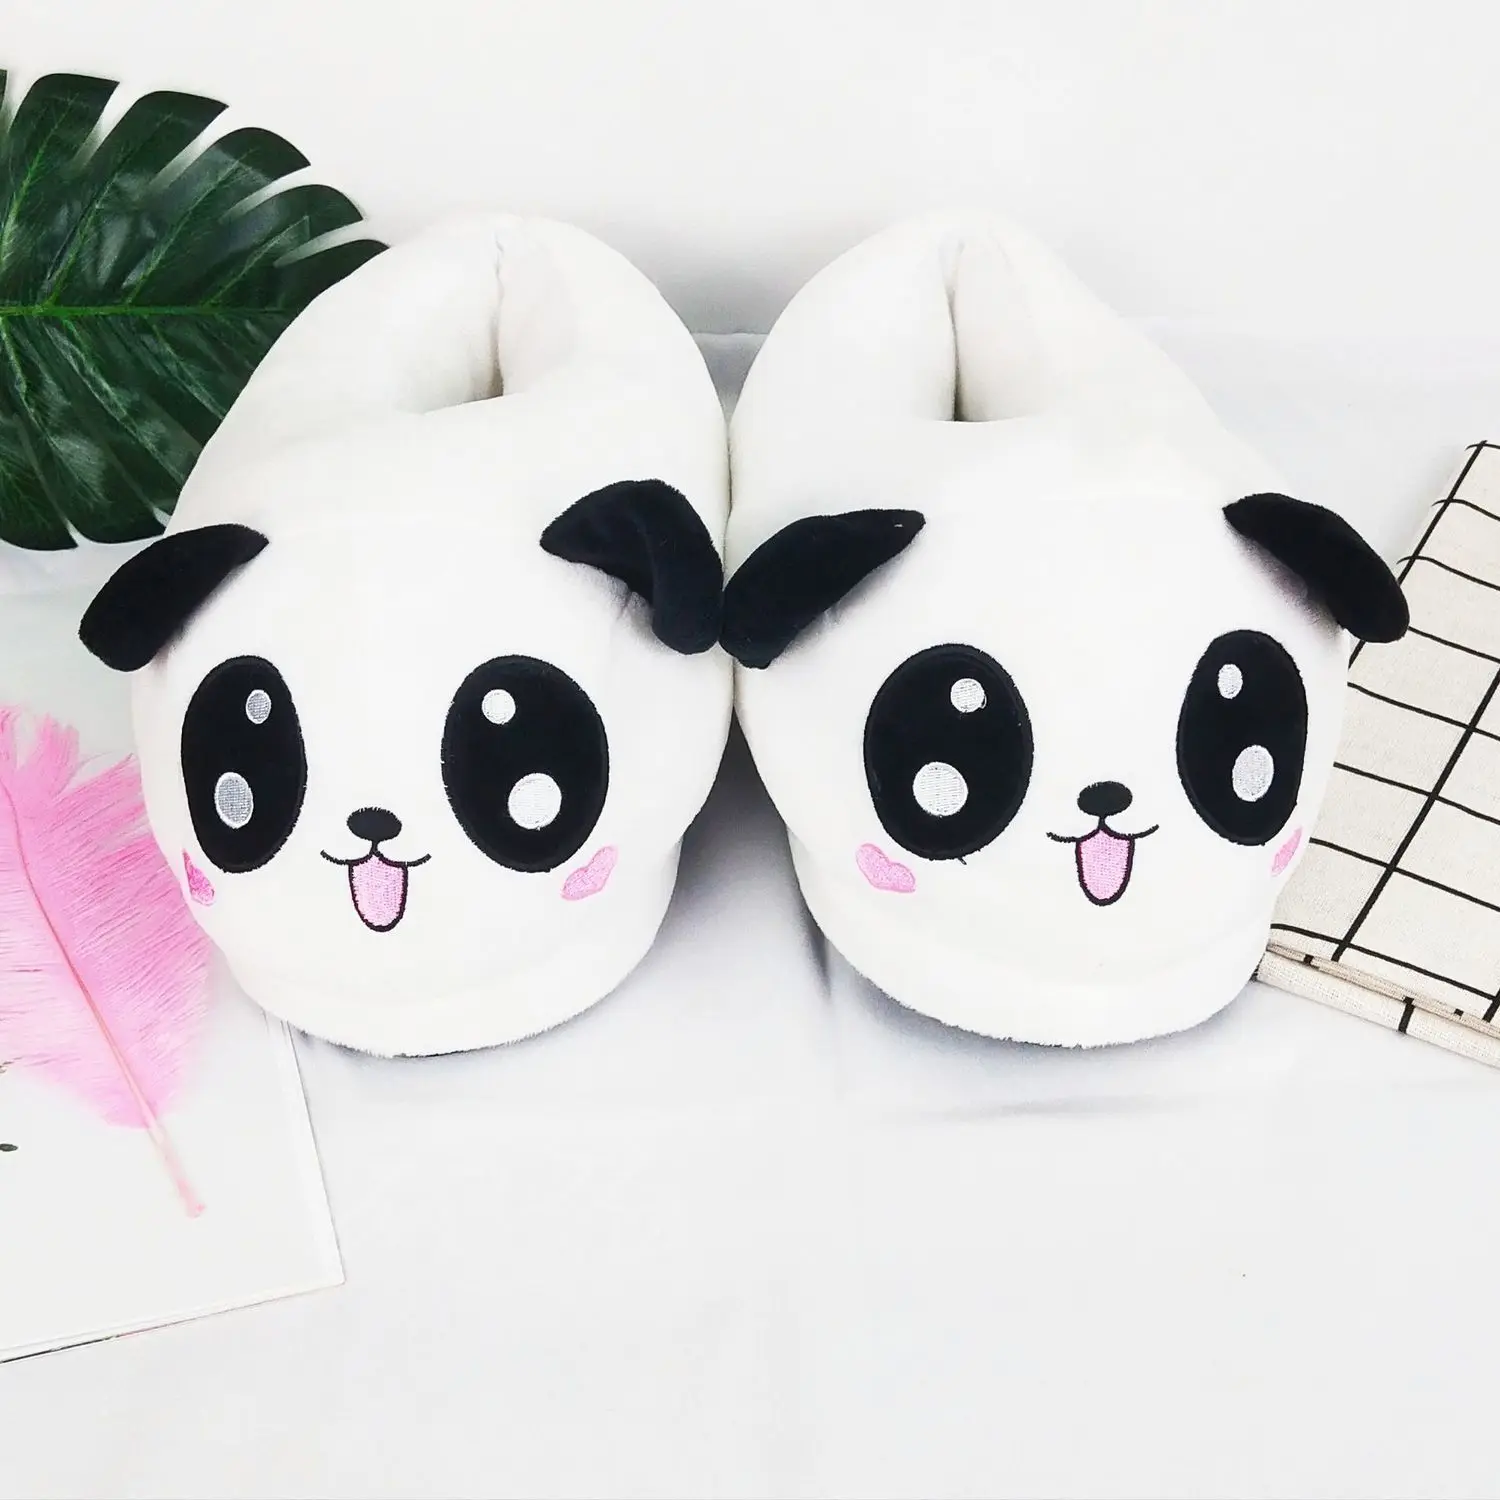 

White Cartoon Panda Slippers Novelty Slippers Nonslip Funny One Size Plush Winter Indoor Warm for Bedroom Shoes Home Slippers